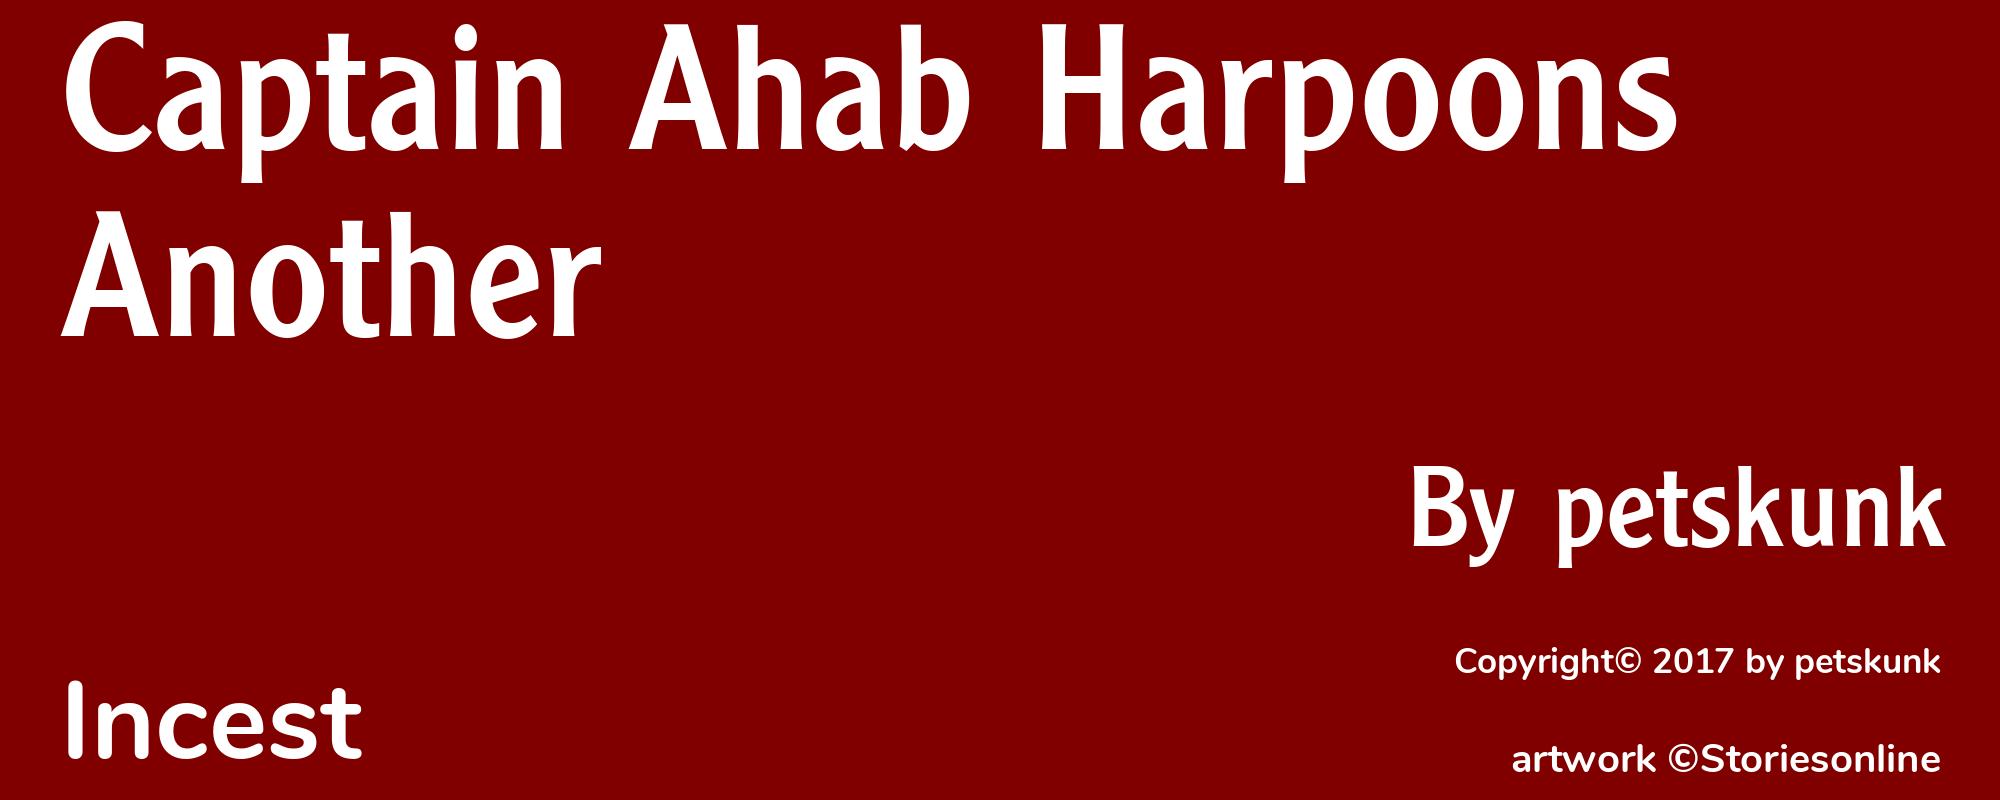 Captain Ahab Harpoons Another - Cover